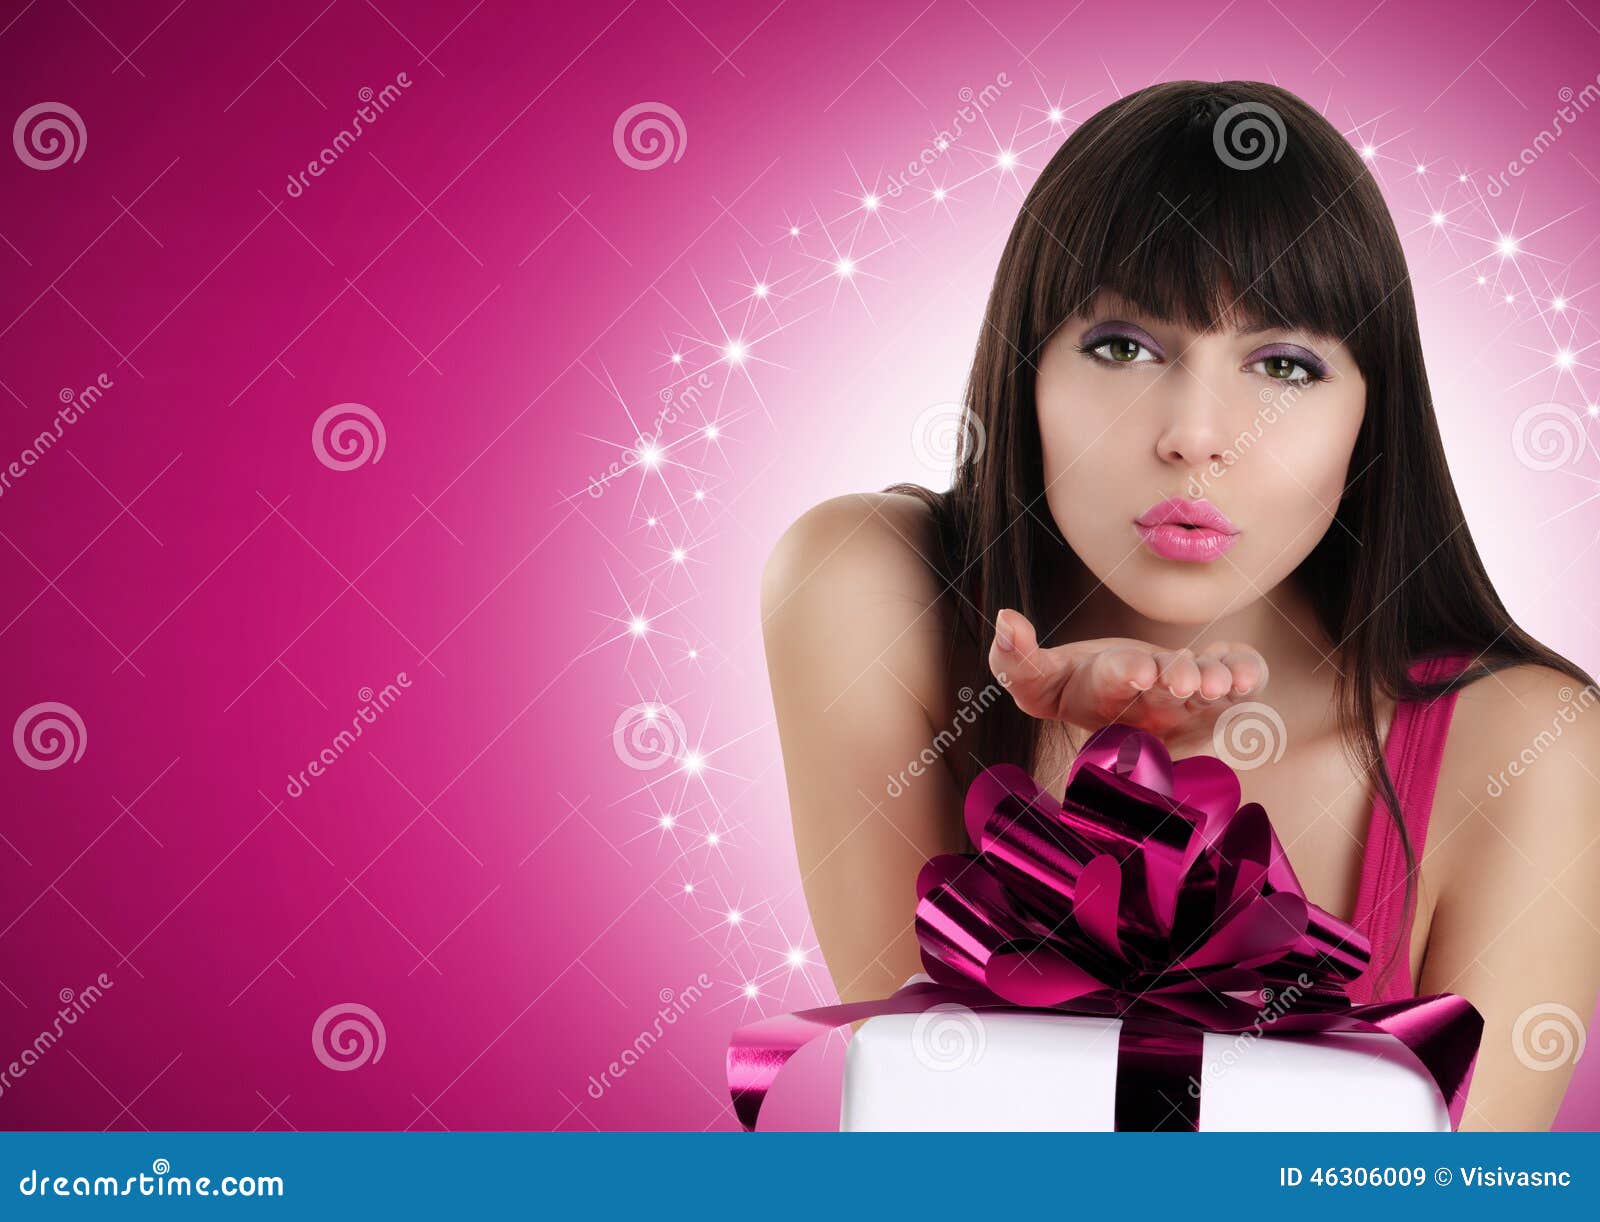 Christmas Woman Blowing Kiss With Gift Box And Red Bow Stock Image ...